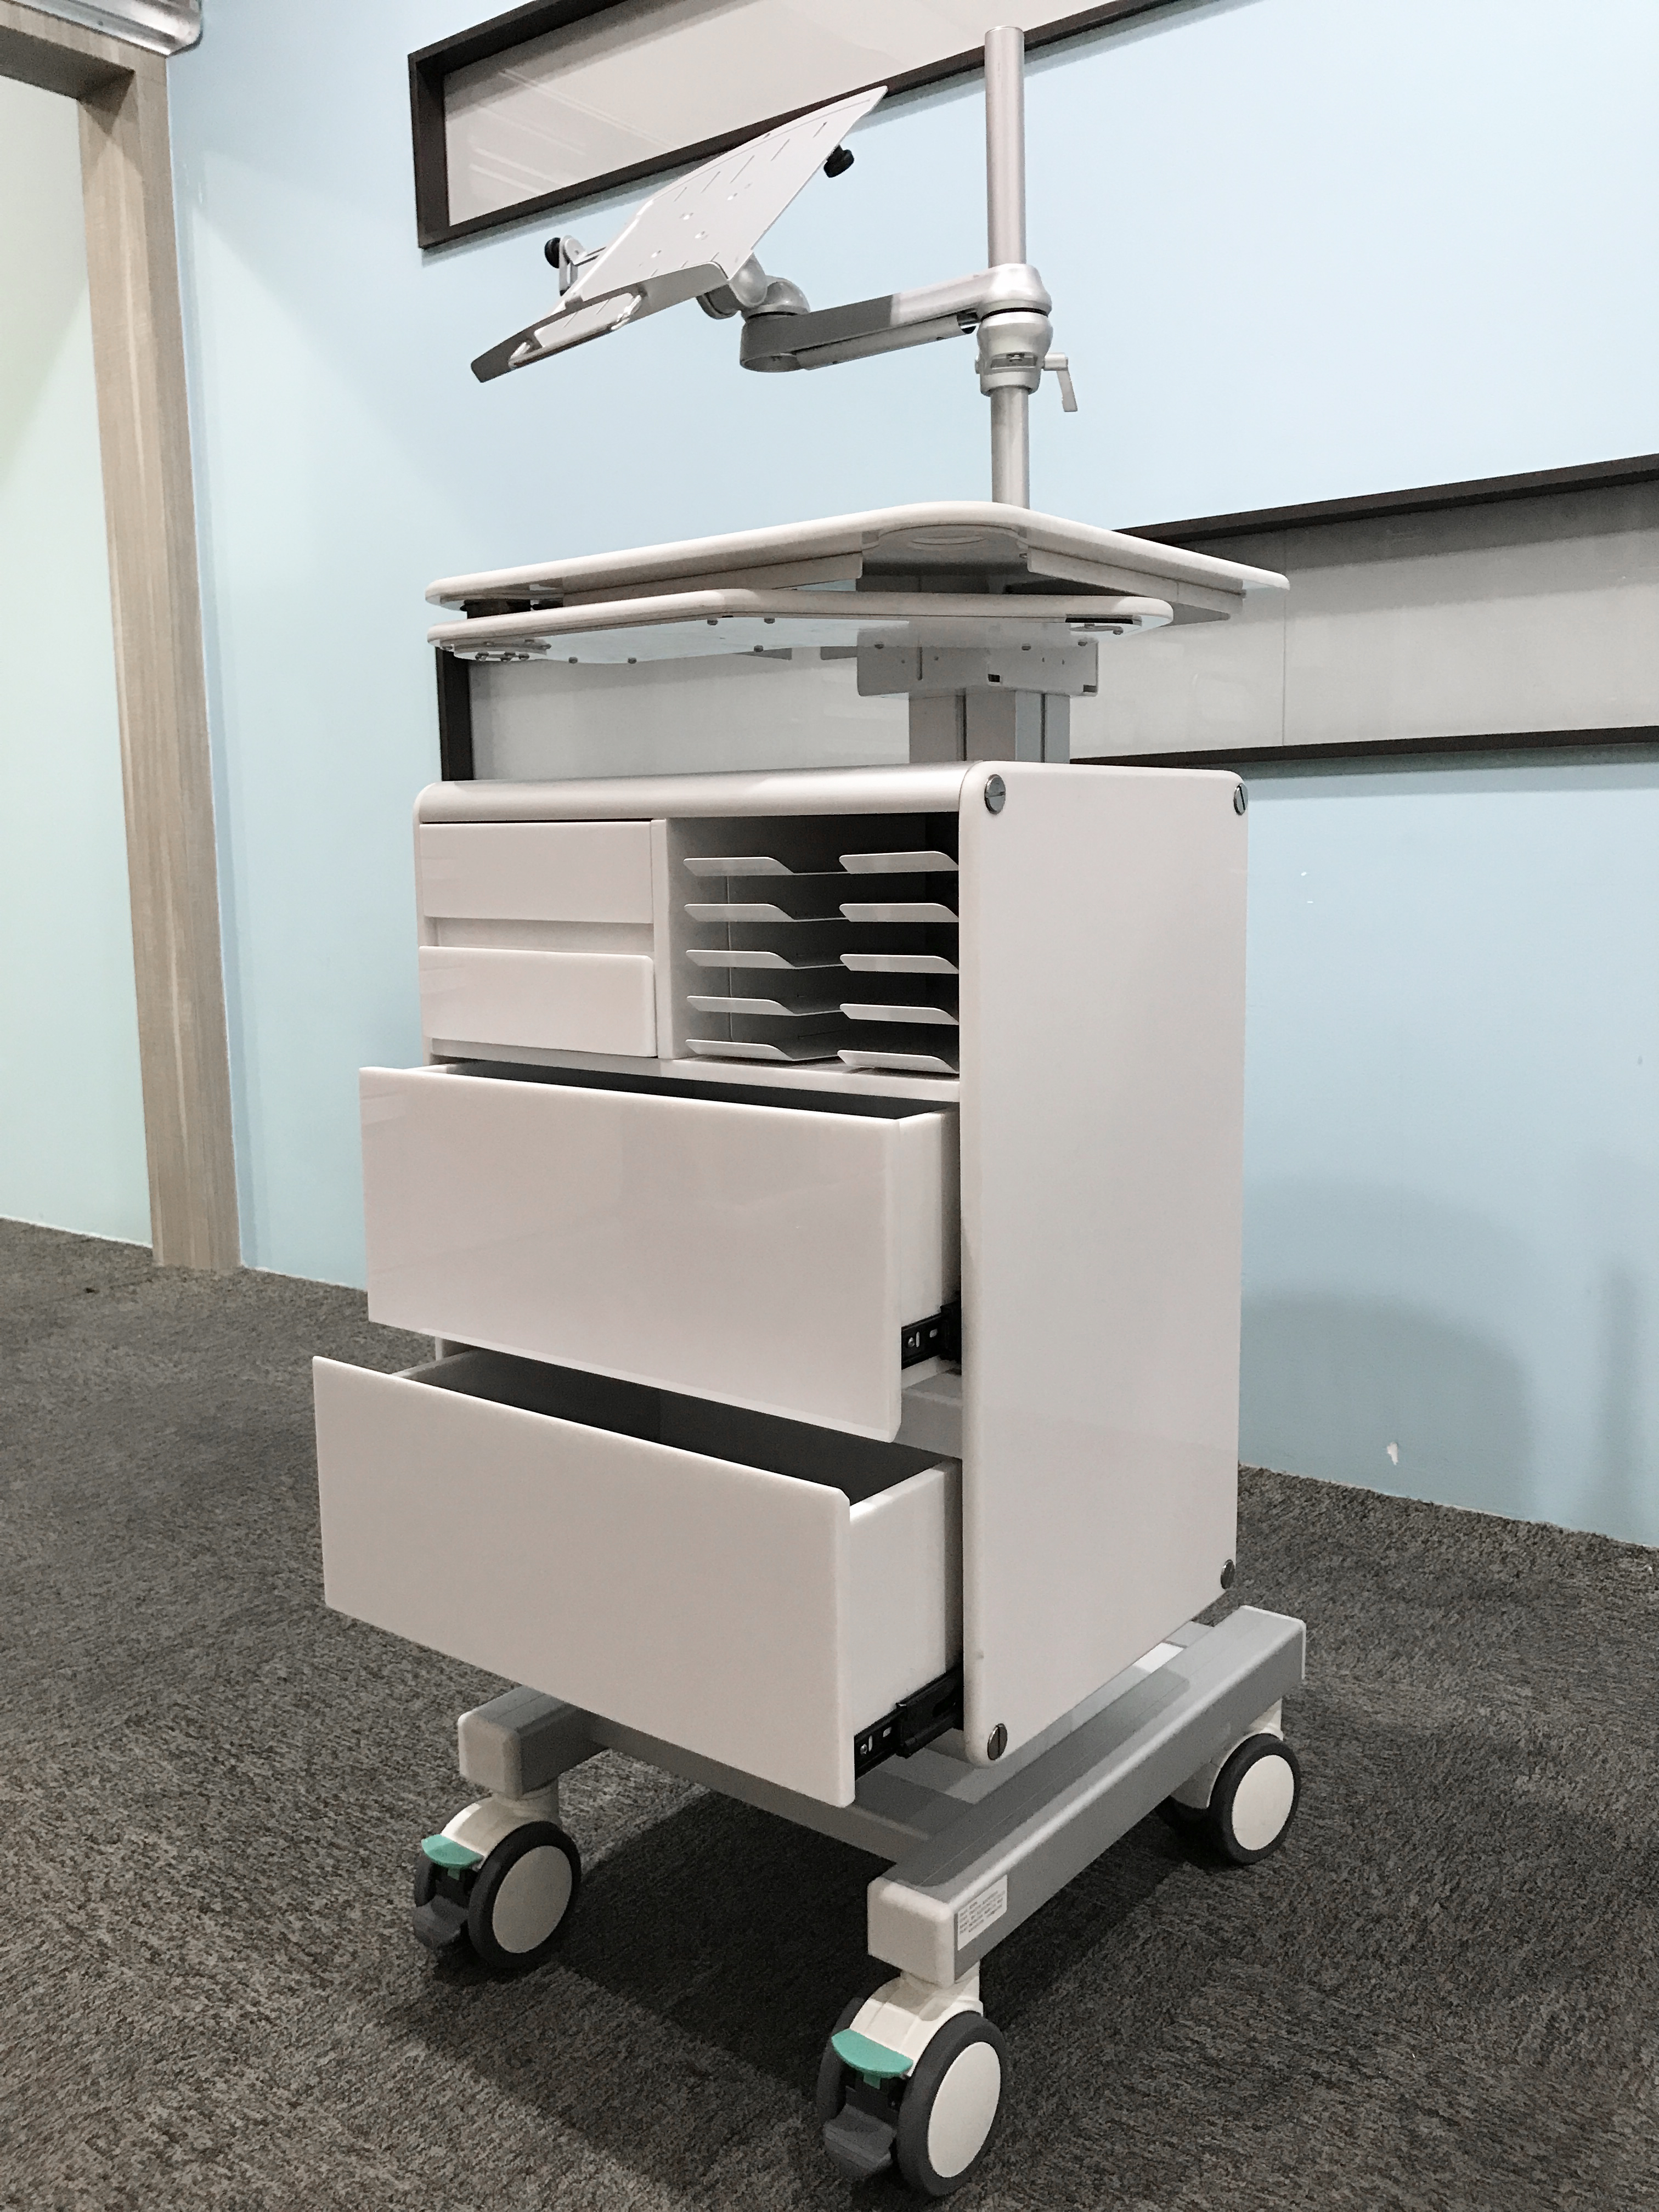 A mobile workstation which caters to convenient filing and storage of administrative related documents peripherals like patient reports and the like